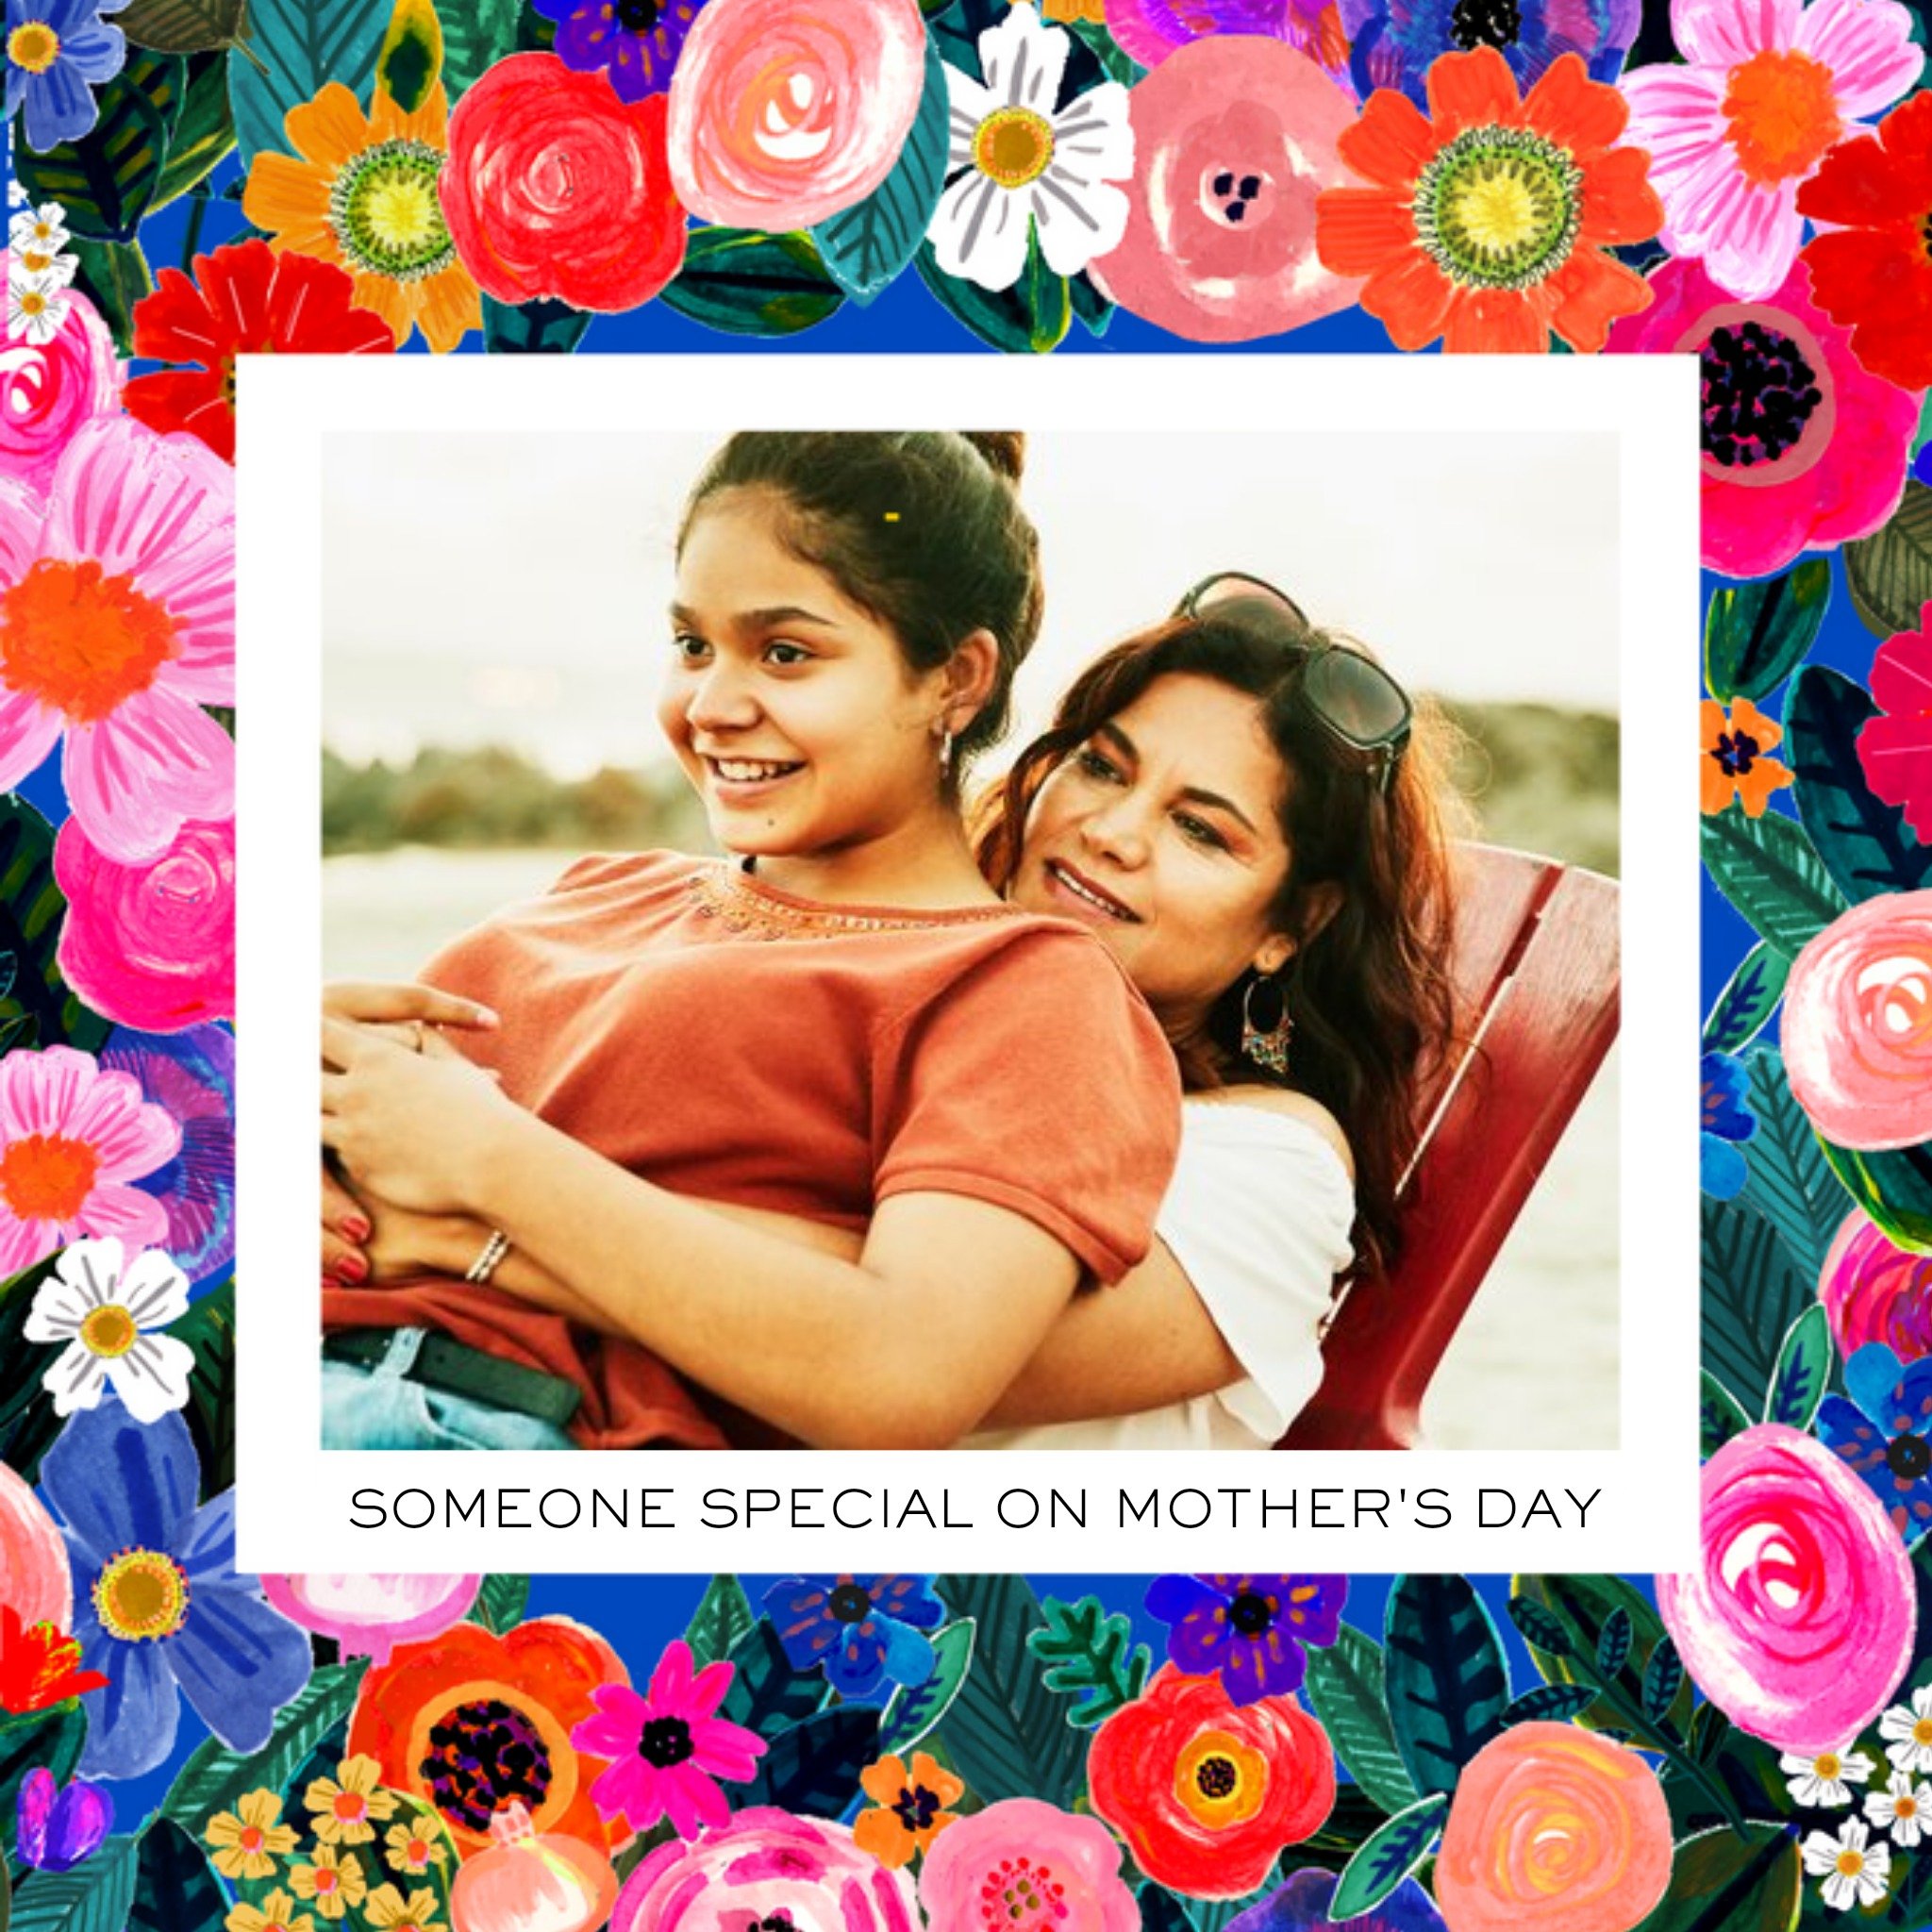 Moonpig Bright Neon Floral Border To Someone Special On Mother's Day Card, Square